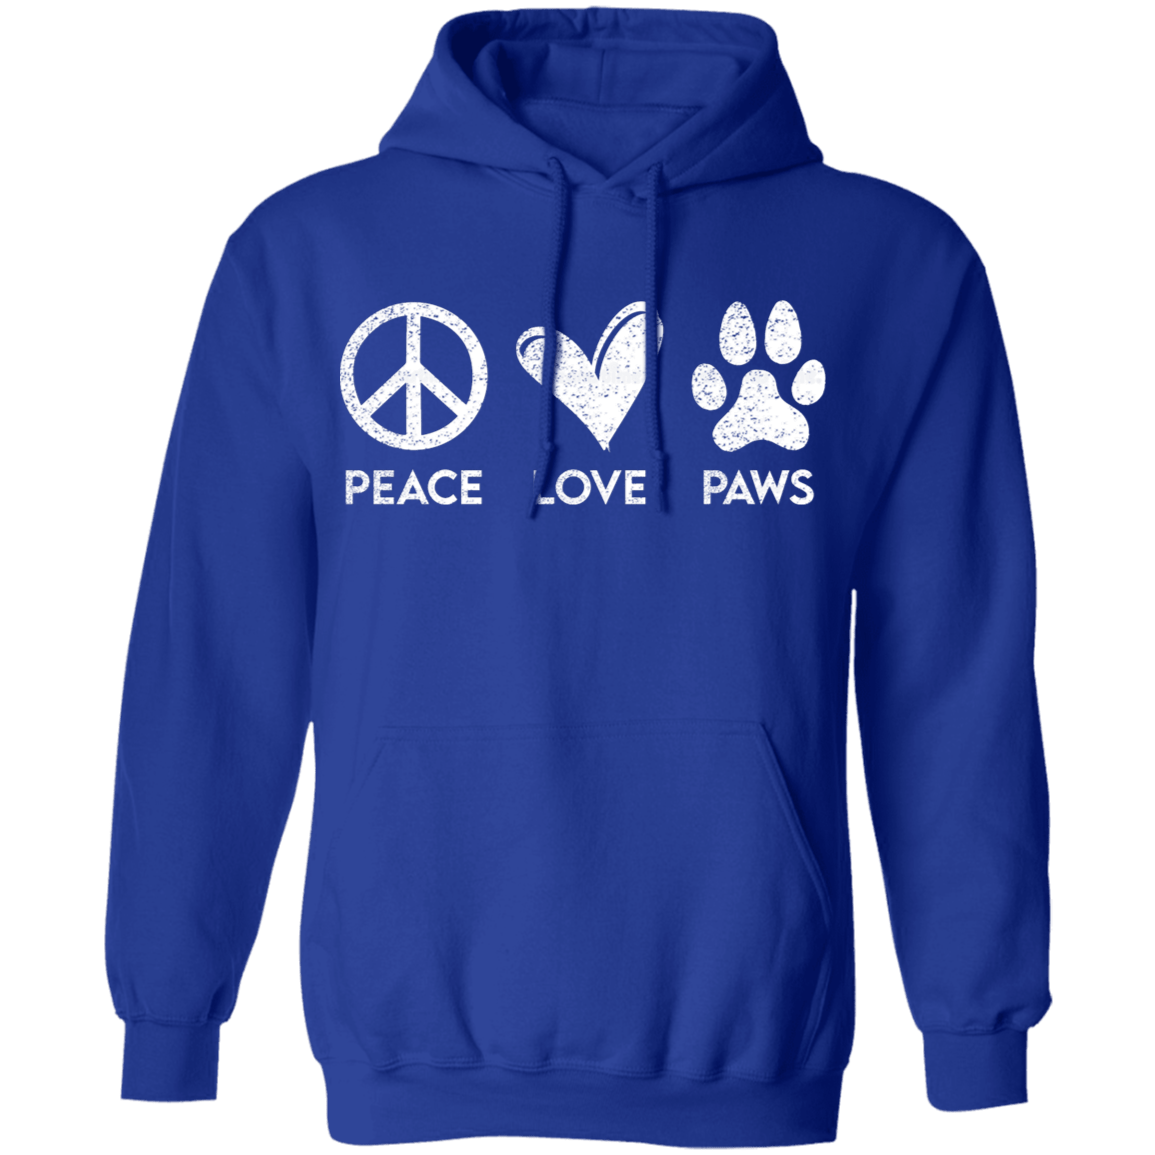 Peace Love Paws Signs  - Hoodie.